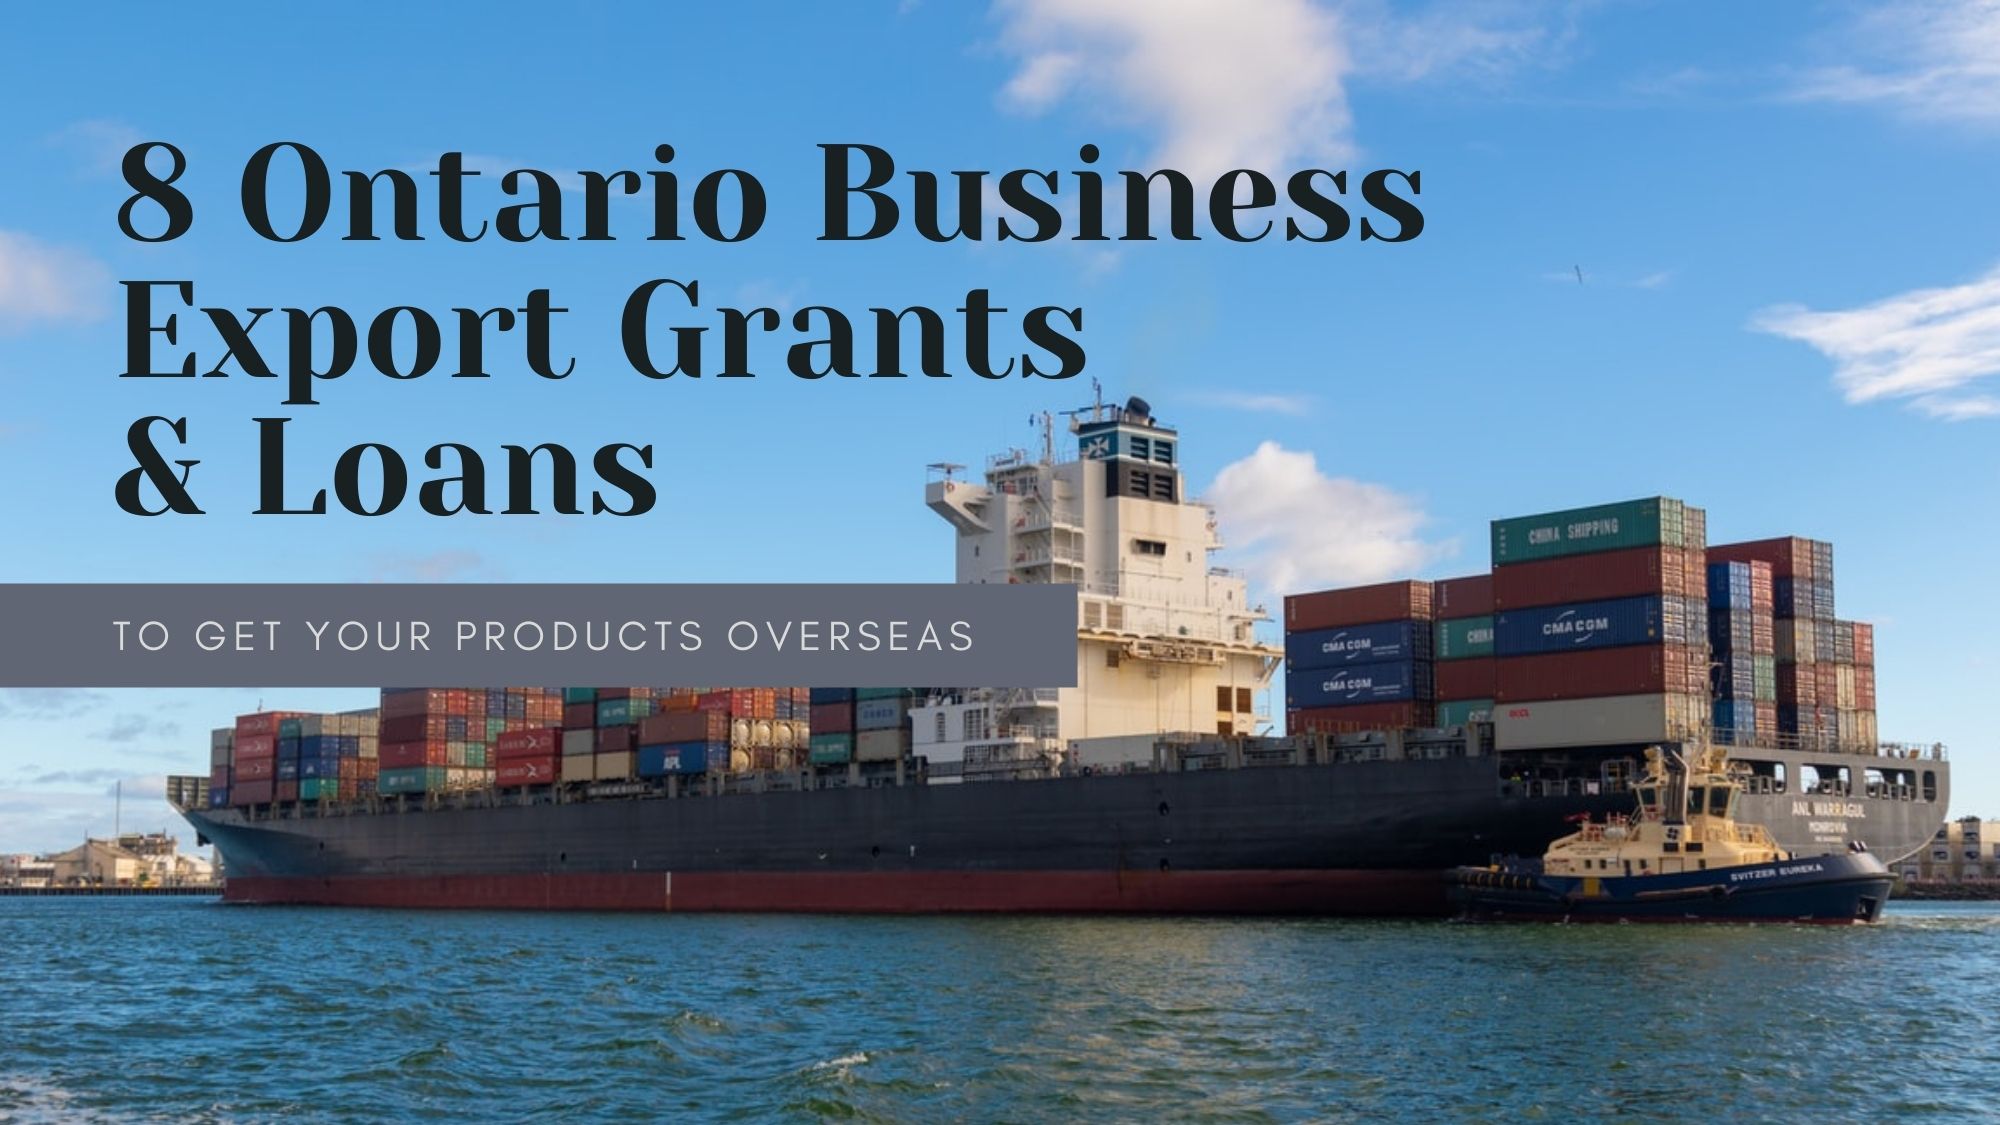 8 Ontario Business Export Grants & Loans to Get Your Products Overseas